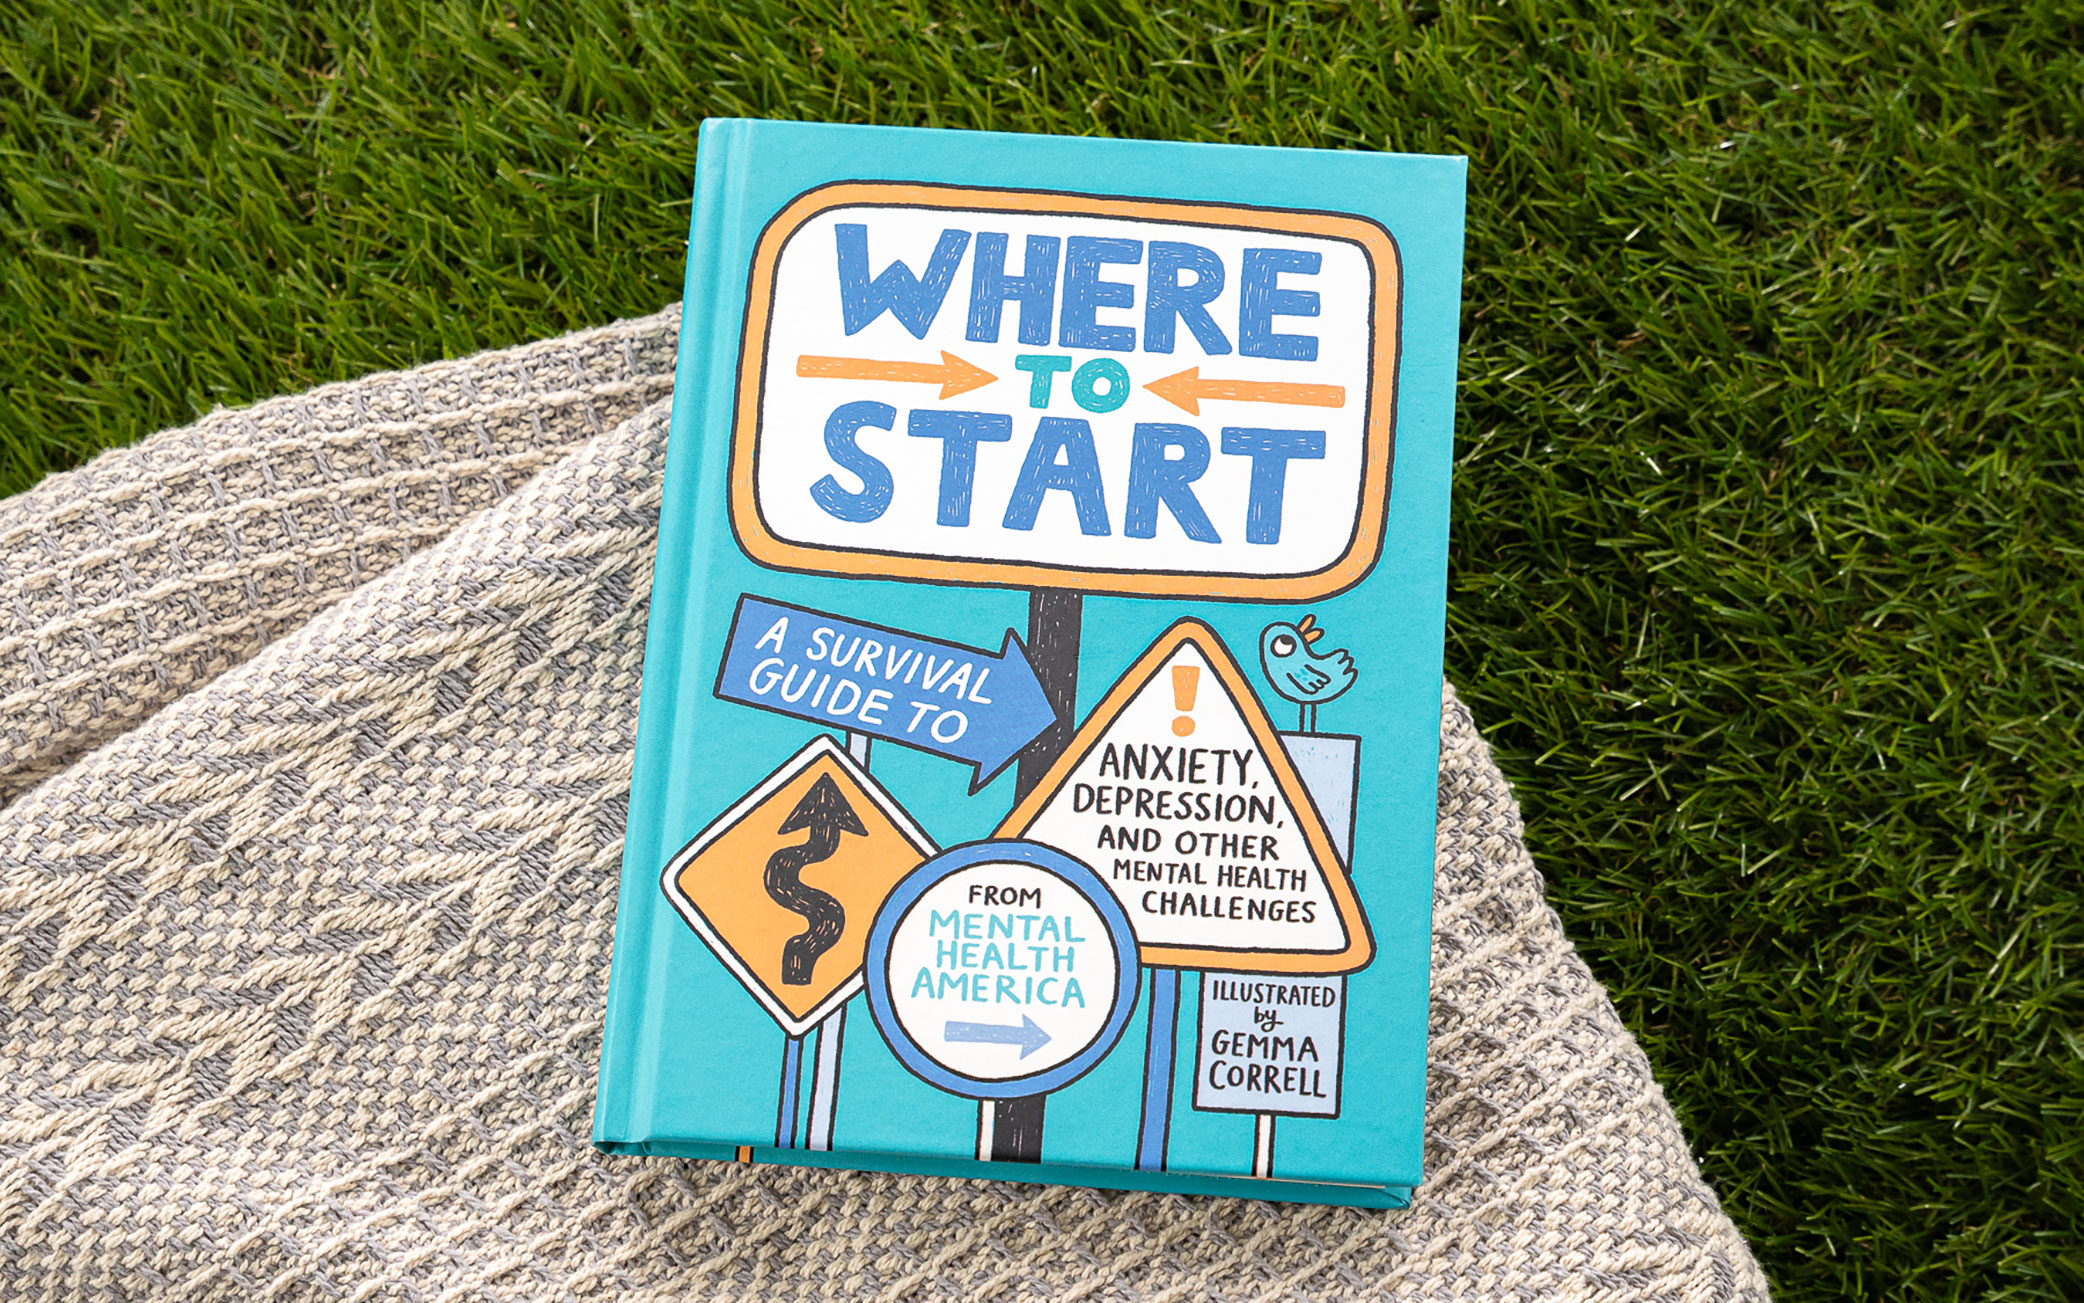 Where to Start book rests on blanket on top of grass